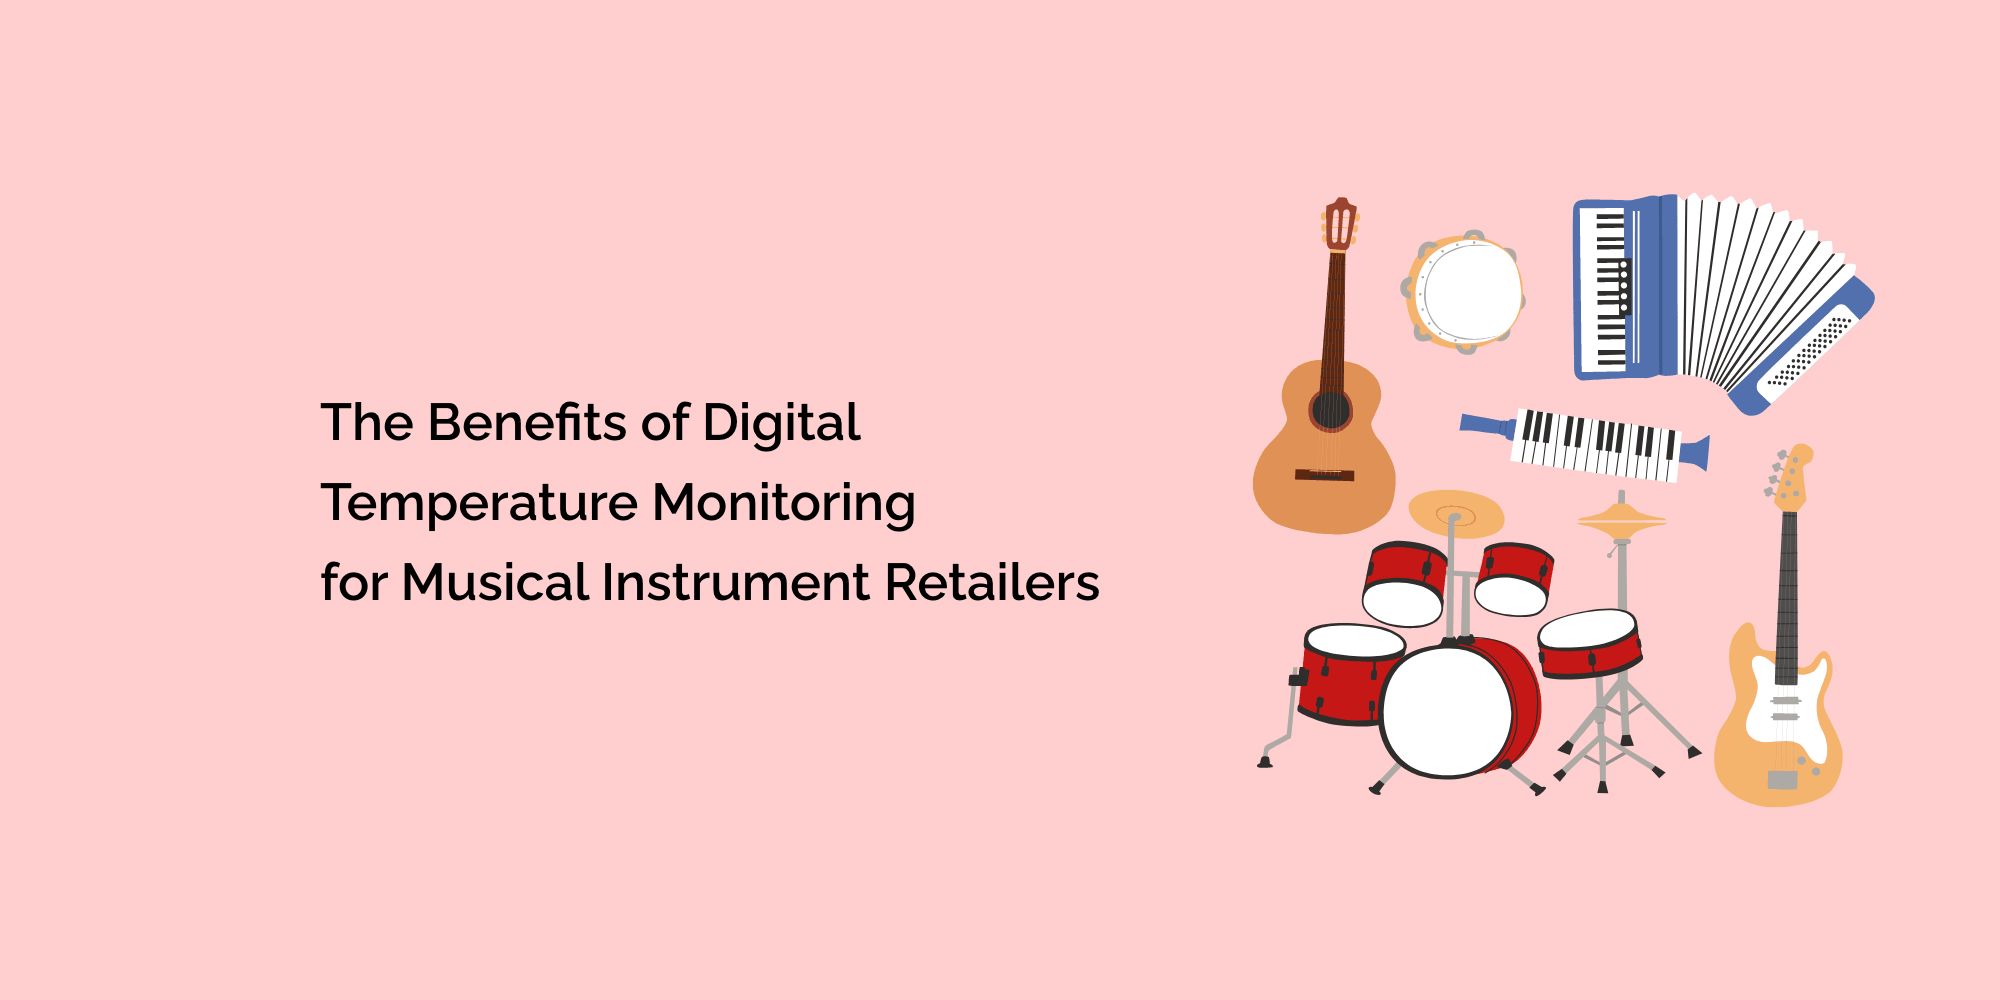 The Benefits of Digital Temperature Monitoring for Musical Instrument Retailers